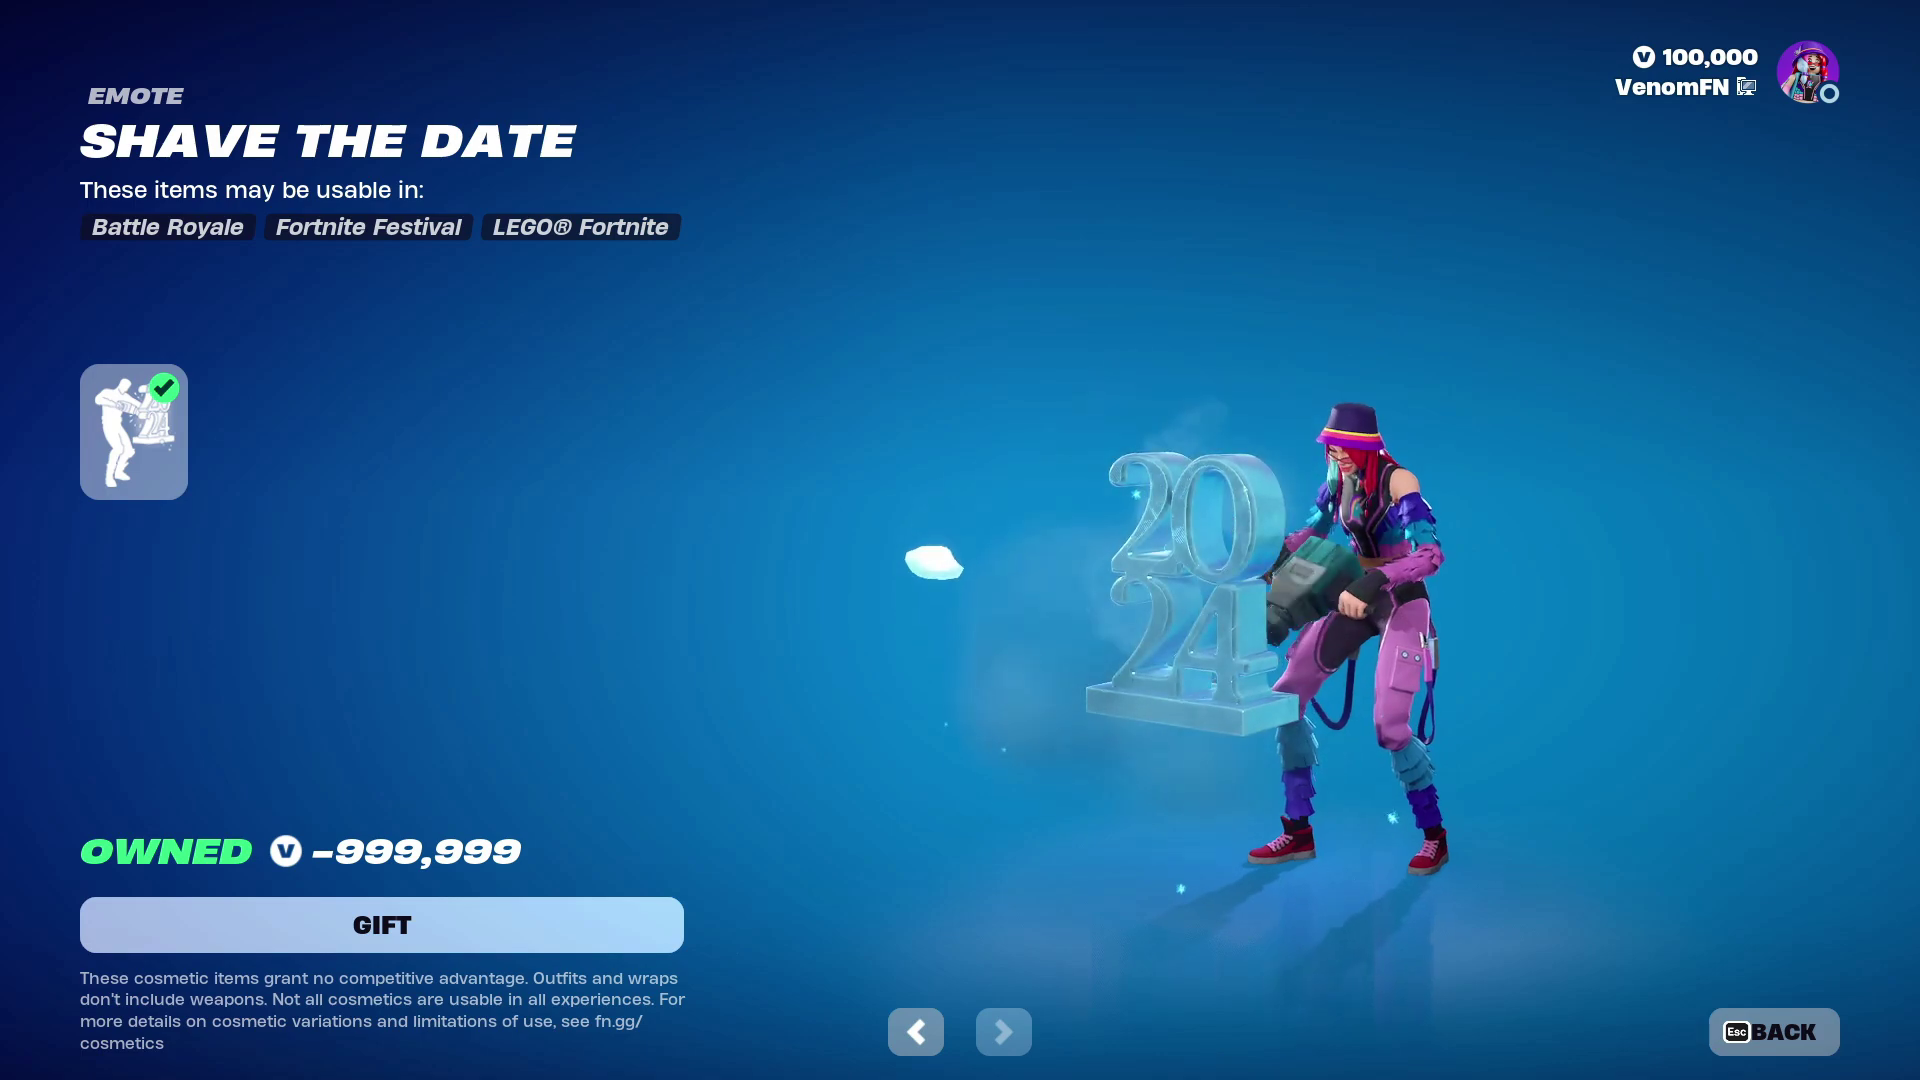 Shave The Date emote